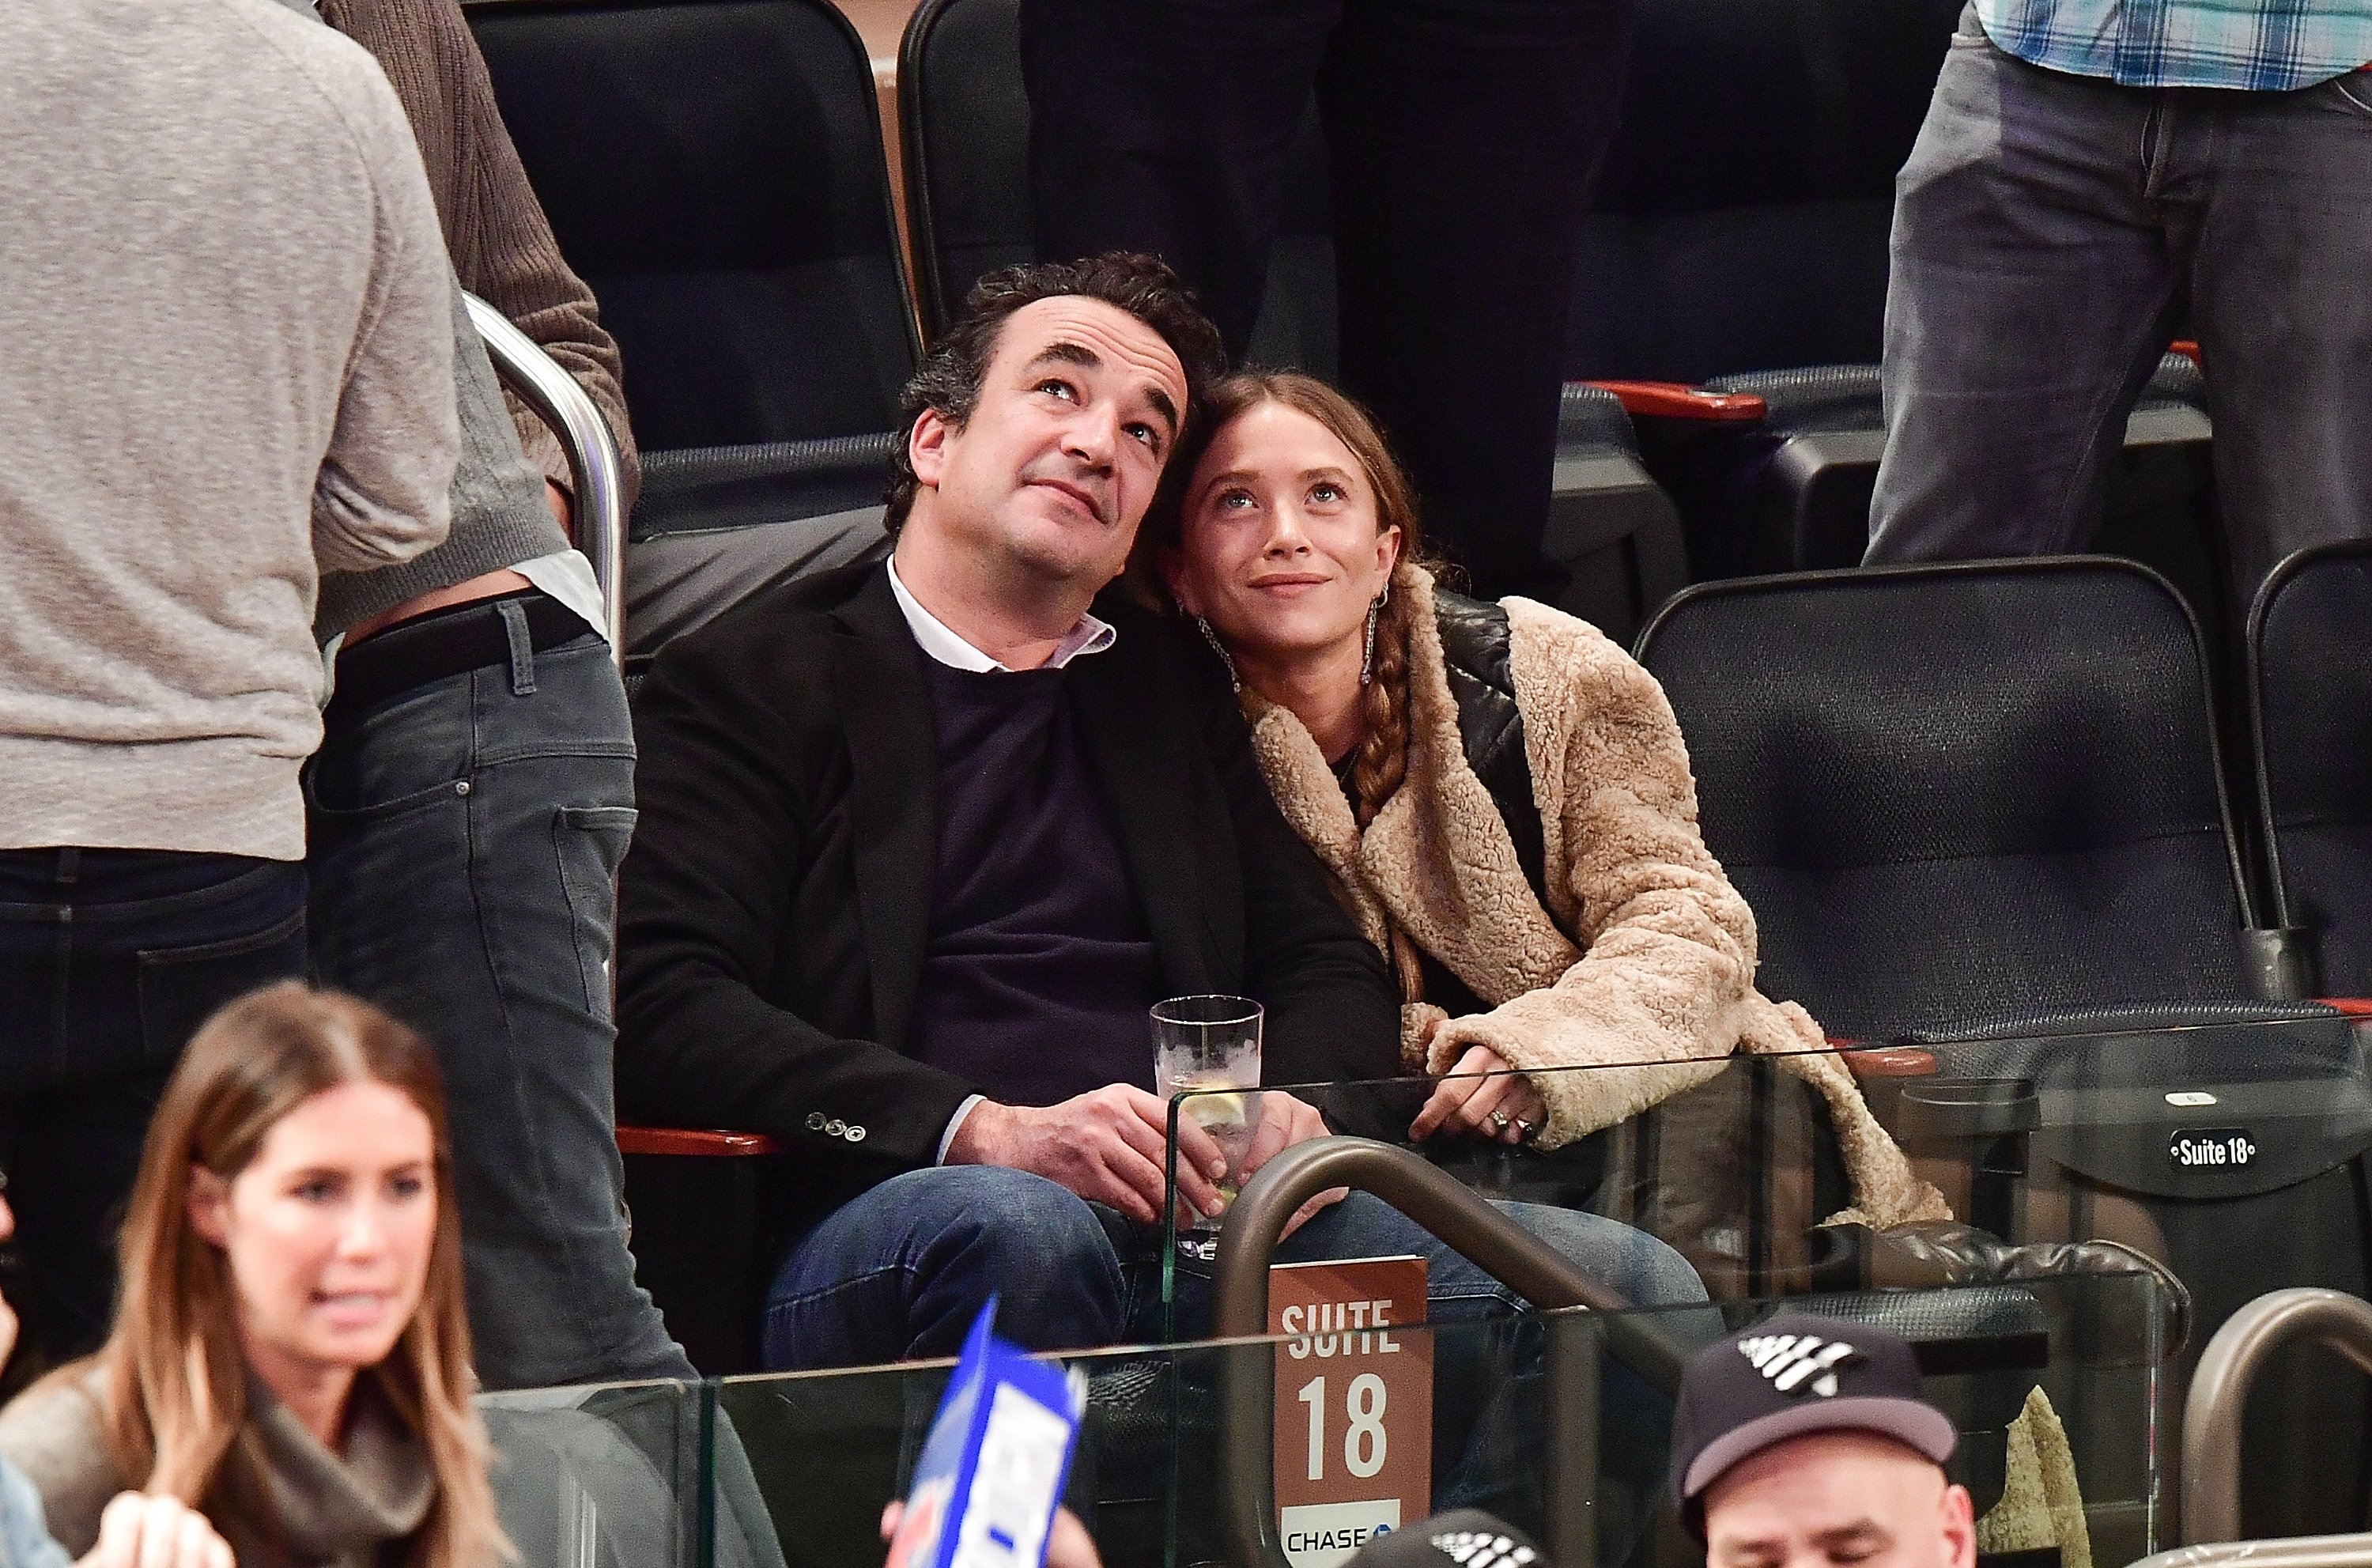 Olivier Sarkozy and Mary-Kate Olsen during New York Knicks vs Brooklyn Nets game at Madison Square Garden on November 9, 2016 in New York City. / Source: Getty Images